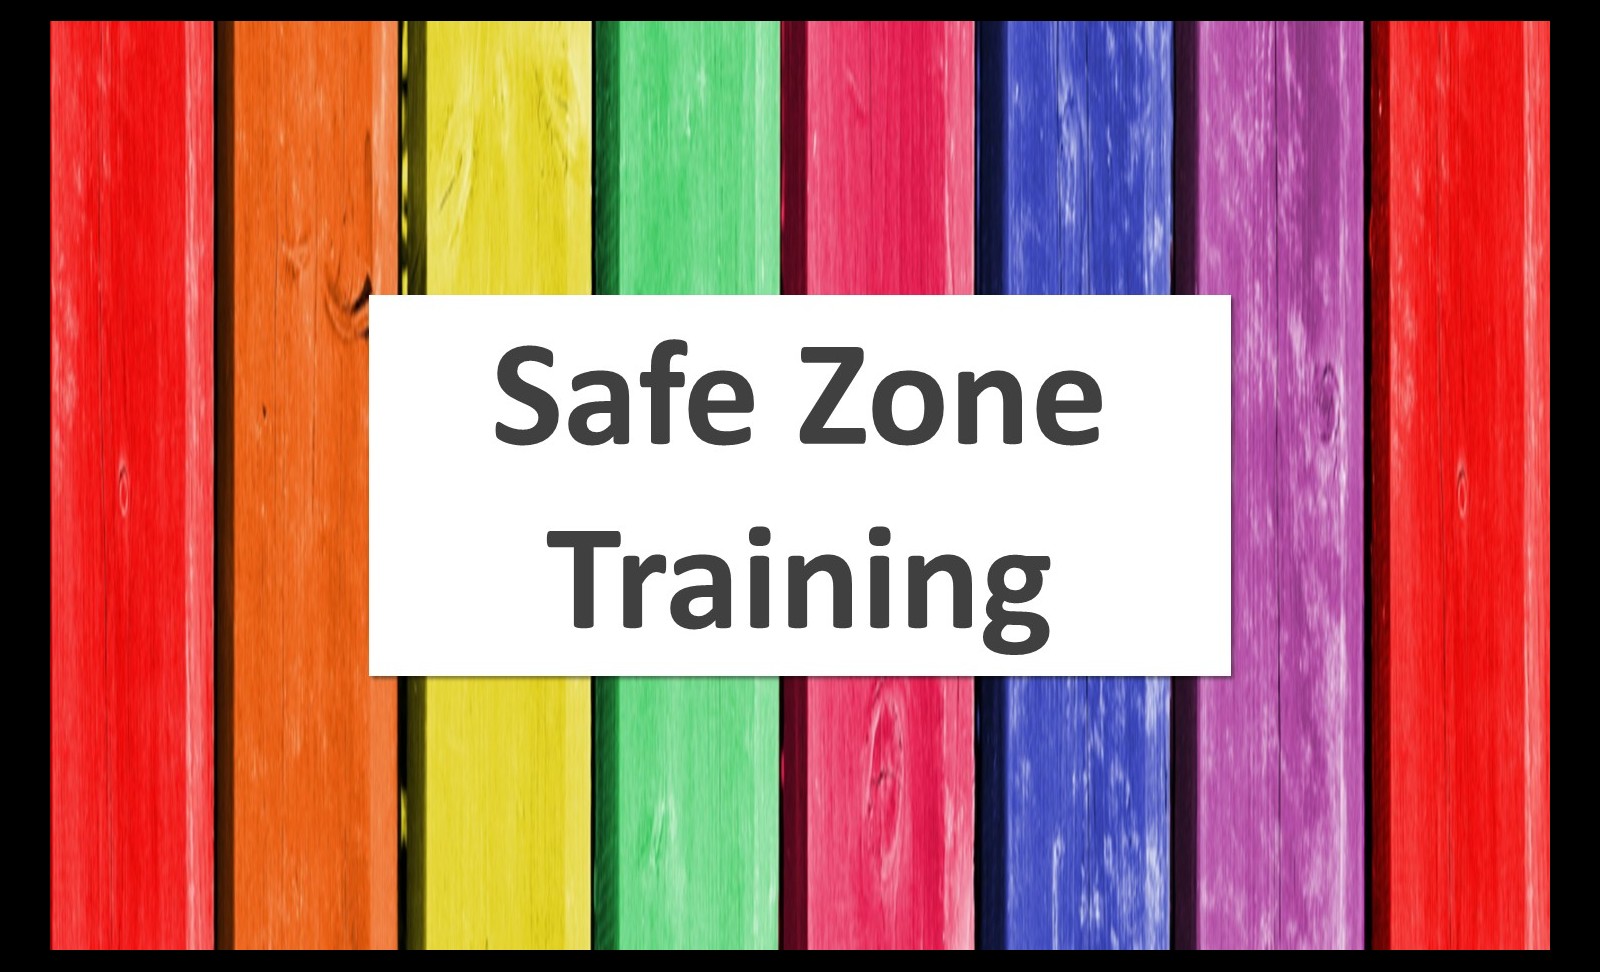 Attend a Safe Zone Training